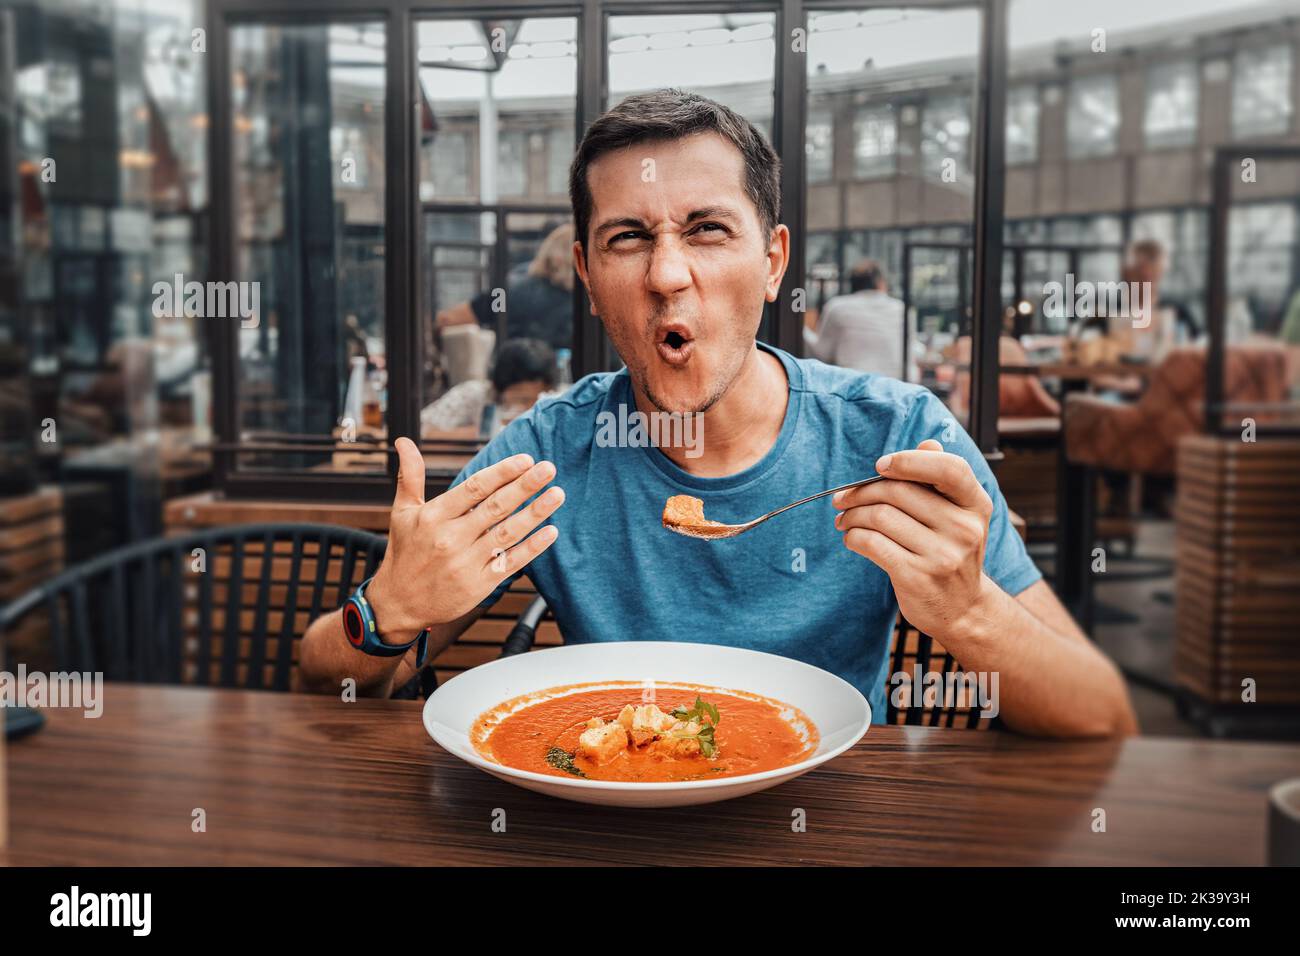 A man tries a spicy and hot red soup in a restaurant and reacts funny emotionally. Seasonings in the national cuisine and an unhealthy diet with overa Stock Photo